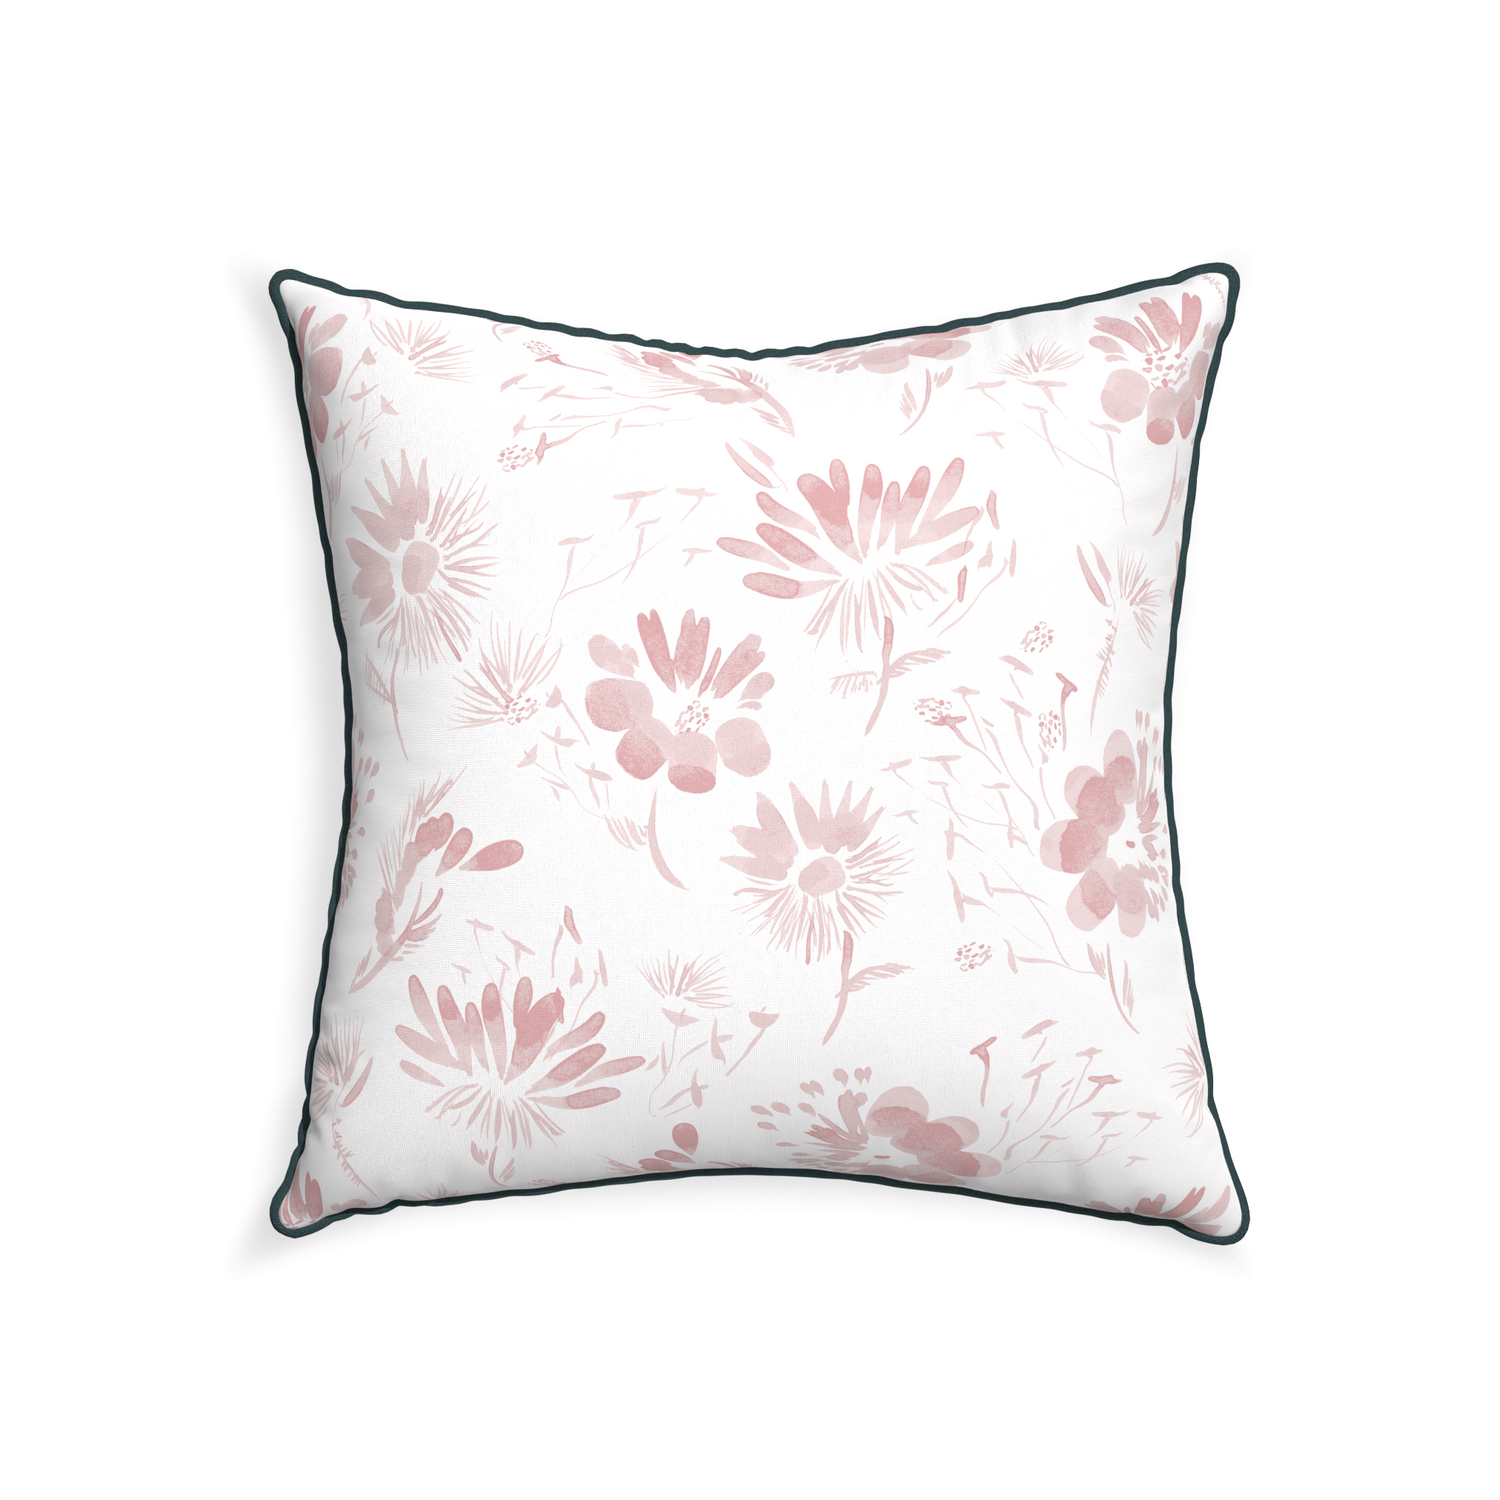 22-square blake custom pink floralpillow with p piping on white background